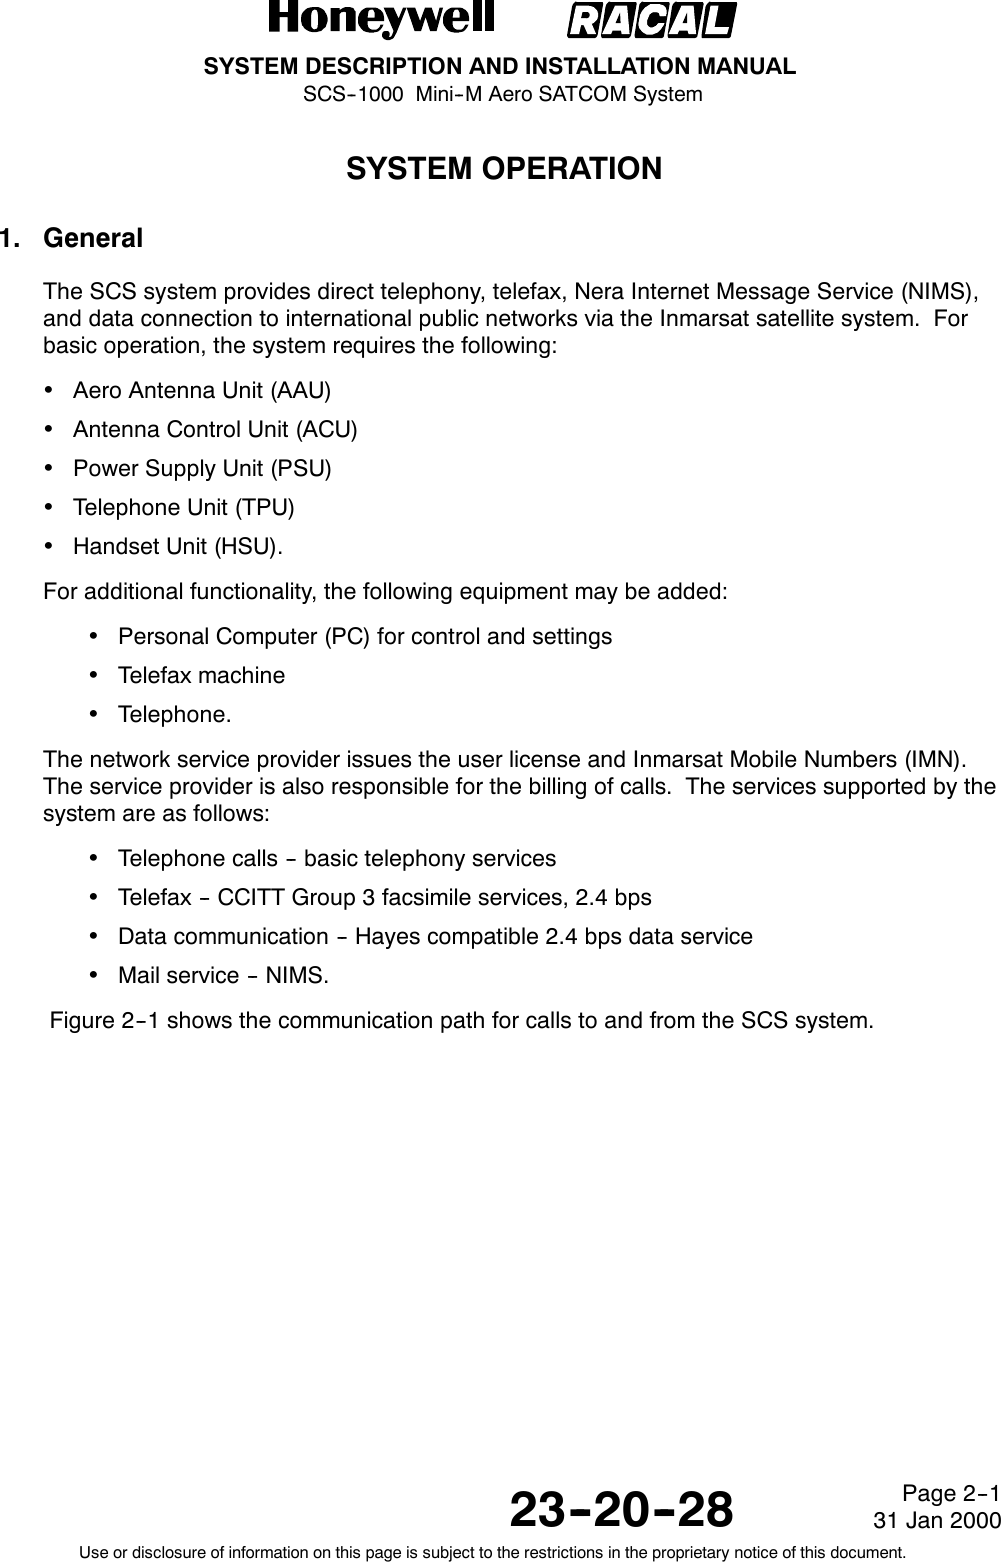 SYSTEM DESCRIPTION AND INSTALLATION MANUALSCS--1000 Mini--M Aero SATCOM System23--20--28Use or disclosure of information on this page is subject to the restrictions in the proprietary notice of this document.Page 2--131 Jan 2000SYSTEM OPERATION1. GeneralThe SCS system provides direct telephony, telefax, Nera Internet Message Service (NIMS),and data connection to international public networks via the Inmarsat satellite system. Forbasic operation, the system requires the following:Aero Antenna Unit (AAU)Antenna Control Unit (ACU)Power Supply Unit (PSU)Telephone Unit (TPU)Handset Unit (HSU).For additional functionality, the following equipment may be added:Personal Computer (PC) for control and settingsTelefax machineTelephone.The network service provider issues the user license and Inmarsat Mobile Numbers (IMN).The service provider is also responsible for the billing of calls. The services supported by thesystem are as follows:Telephone calls -- basic telephony servicesTelefax -- CCITT Group 3 facsimile services, 2.4 bpsData communication -- Hayes compatible 2.4 bps data serviceMail service -- NIMS.Figure 2--1 shows the communication path for calls to and from the SCS system.